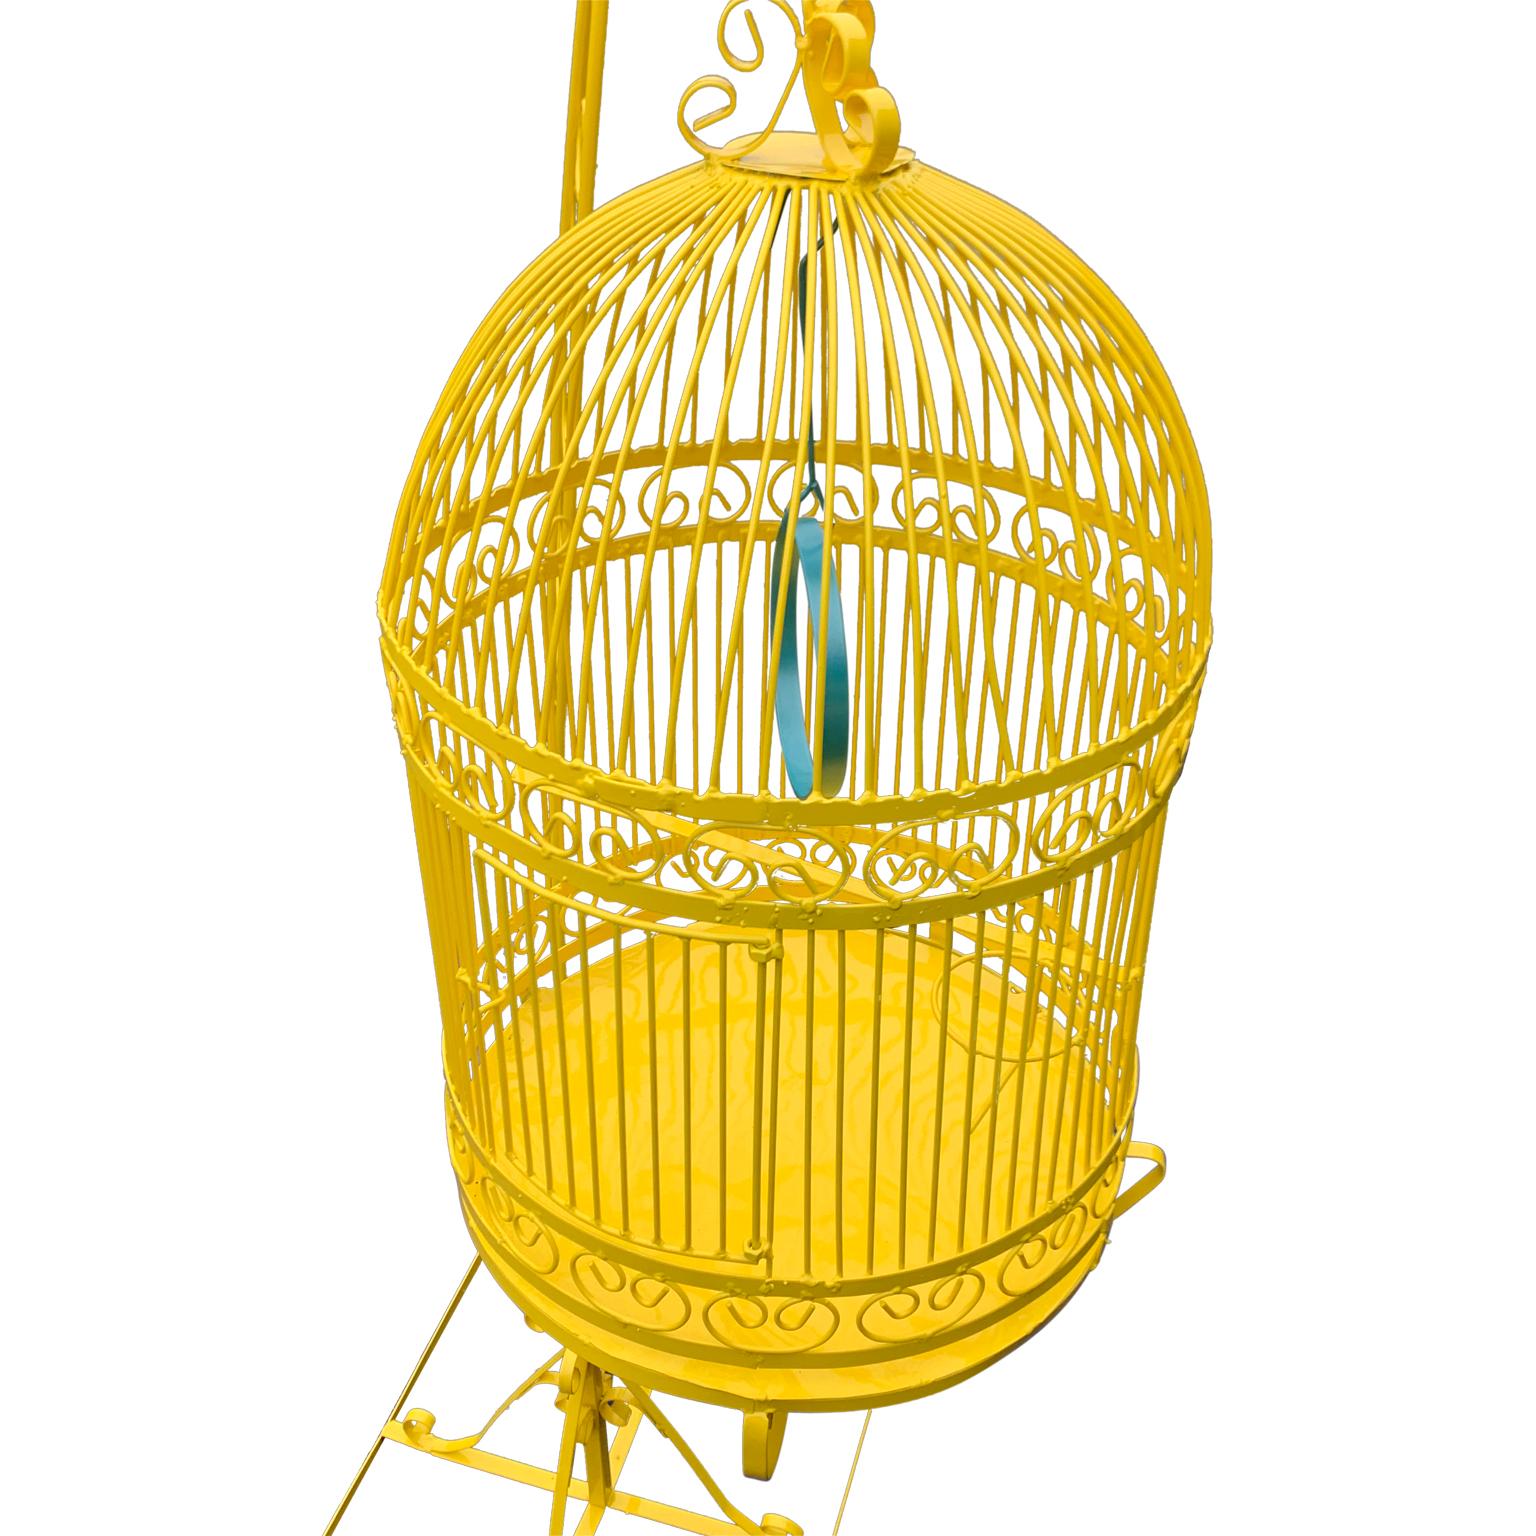 American Vintage Metal Birdcage On Stand, Newly Powder-Coated In Bright Sunshine Yellow